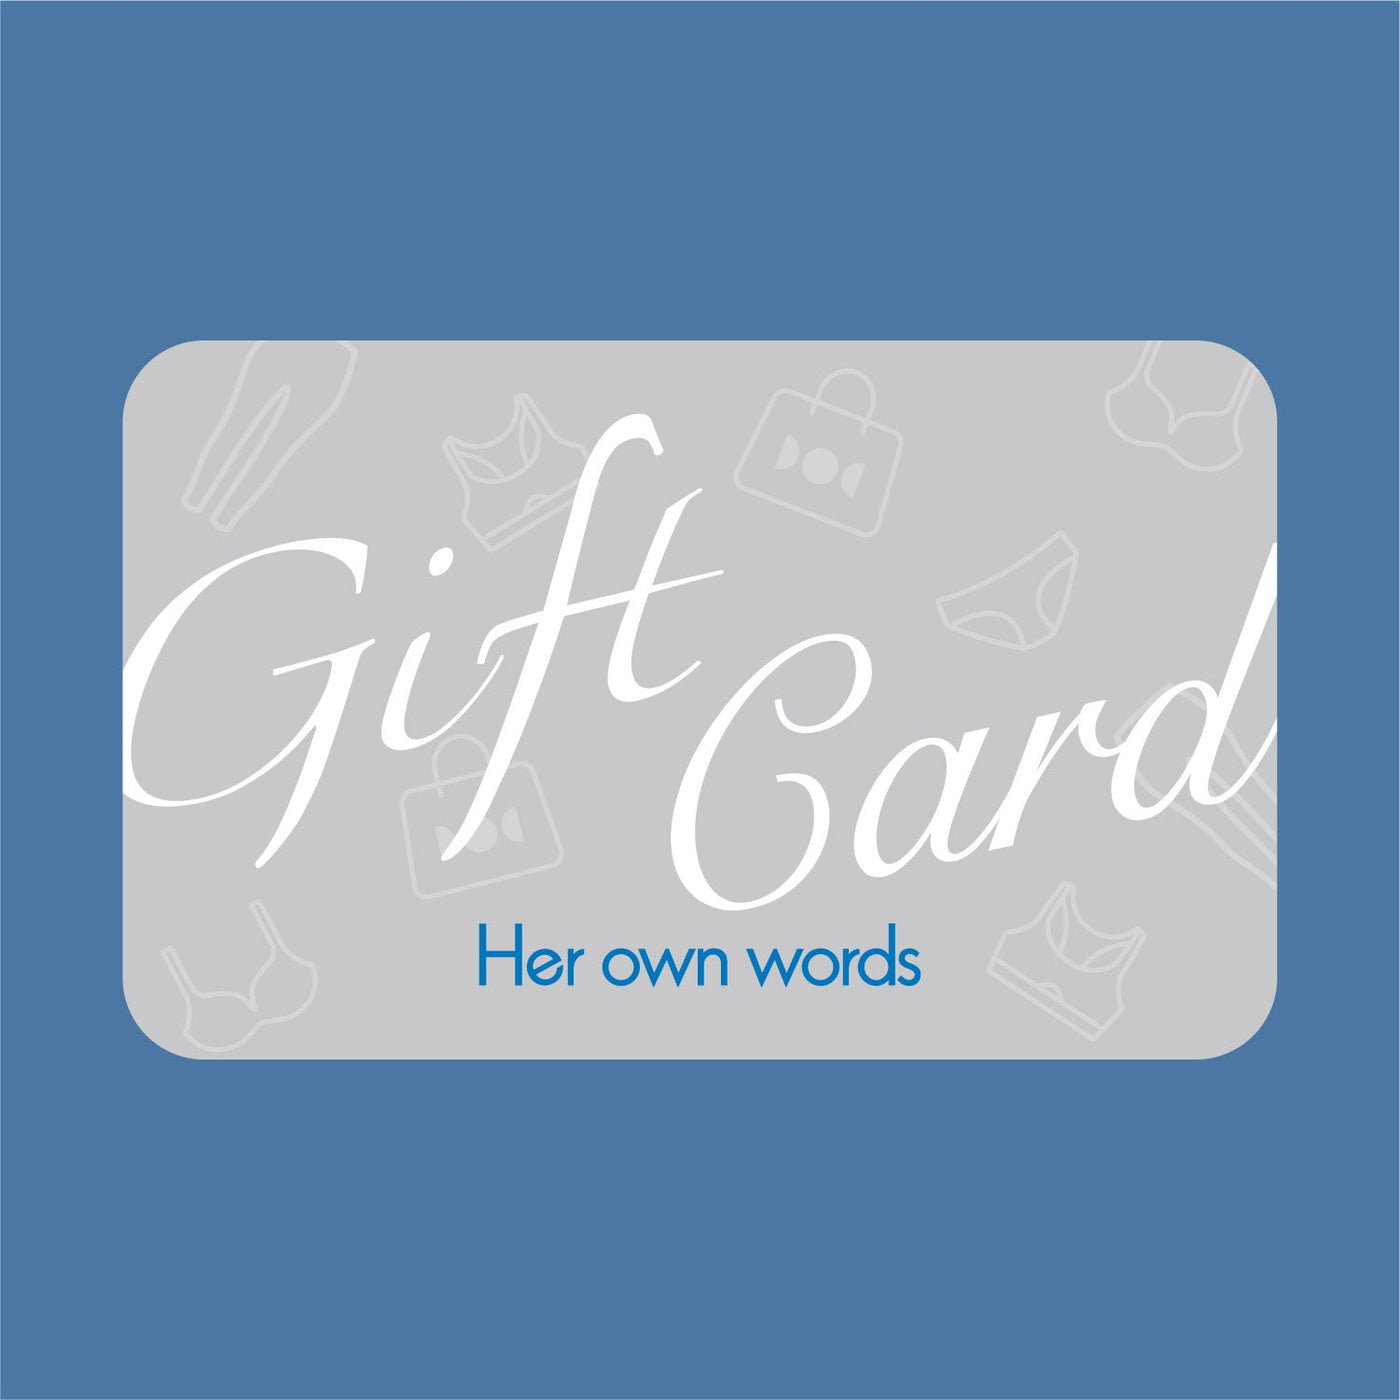 e-Gift Card Gift Cards Her own words HK$800.00 